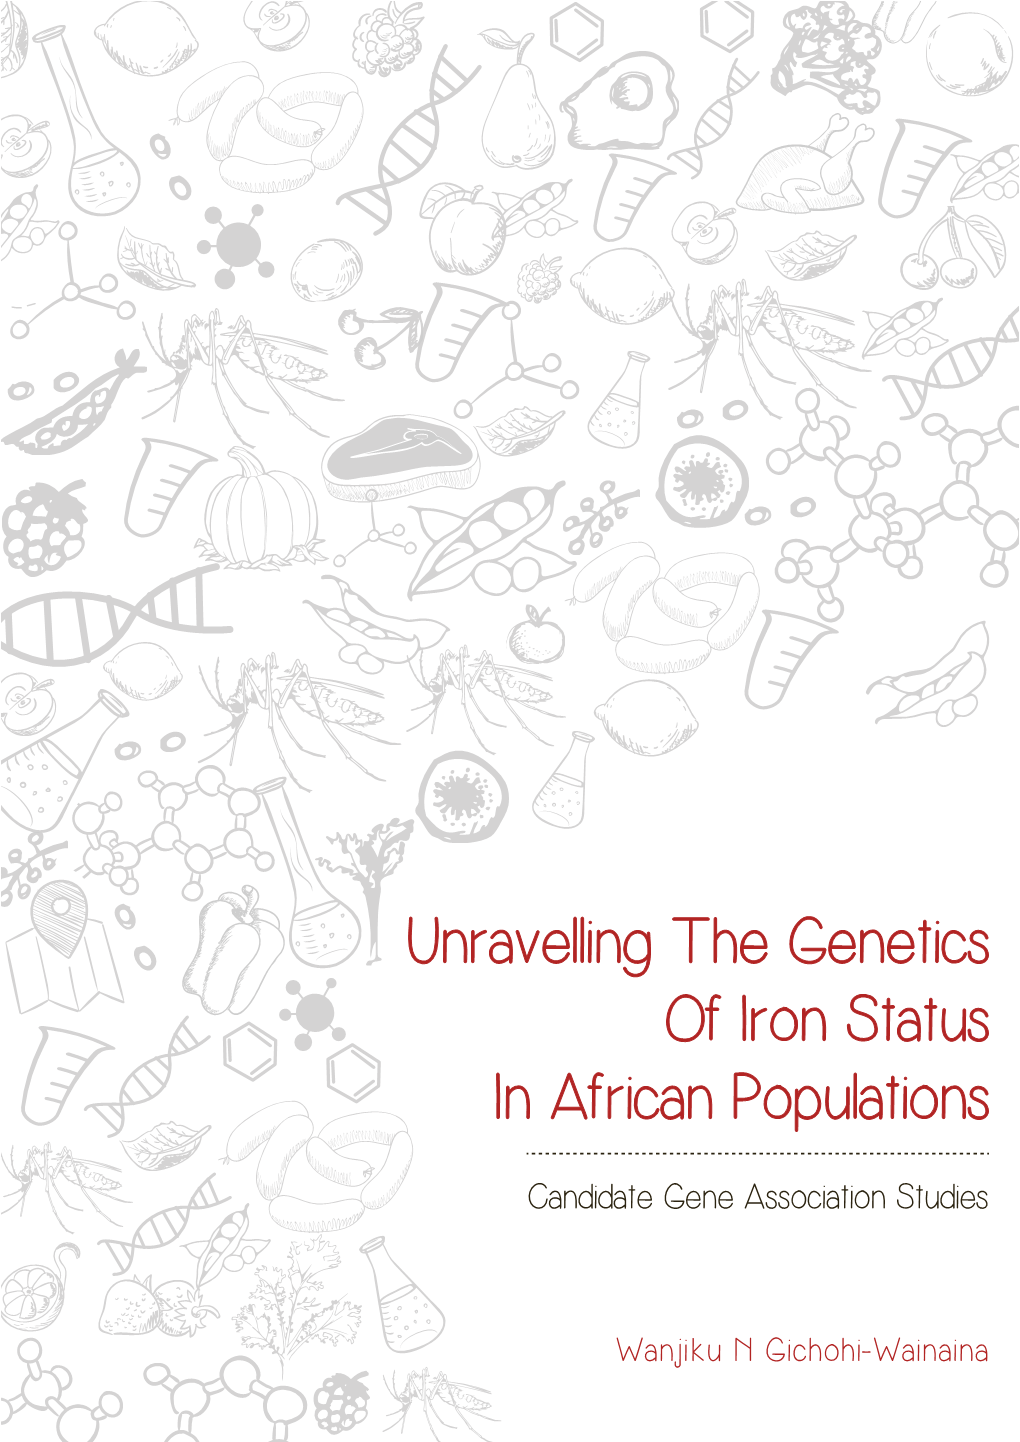 Unravelling the Genetics of Iron Status in African Populations